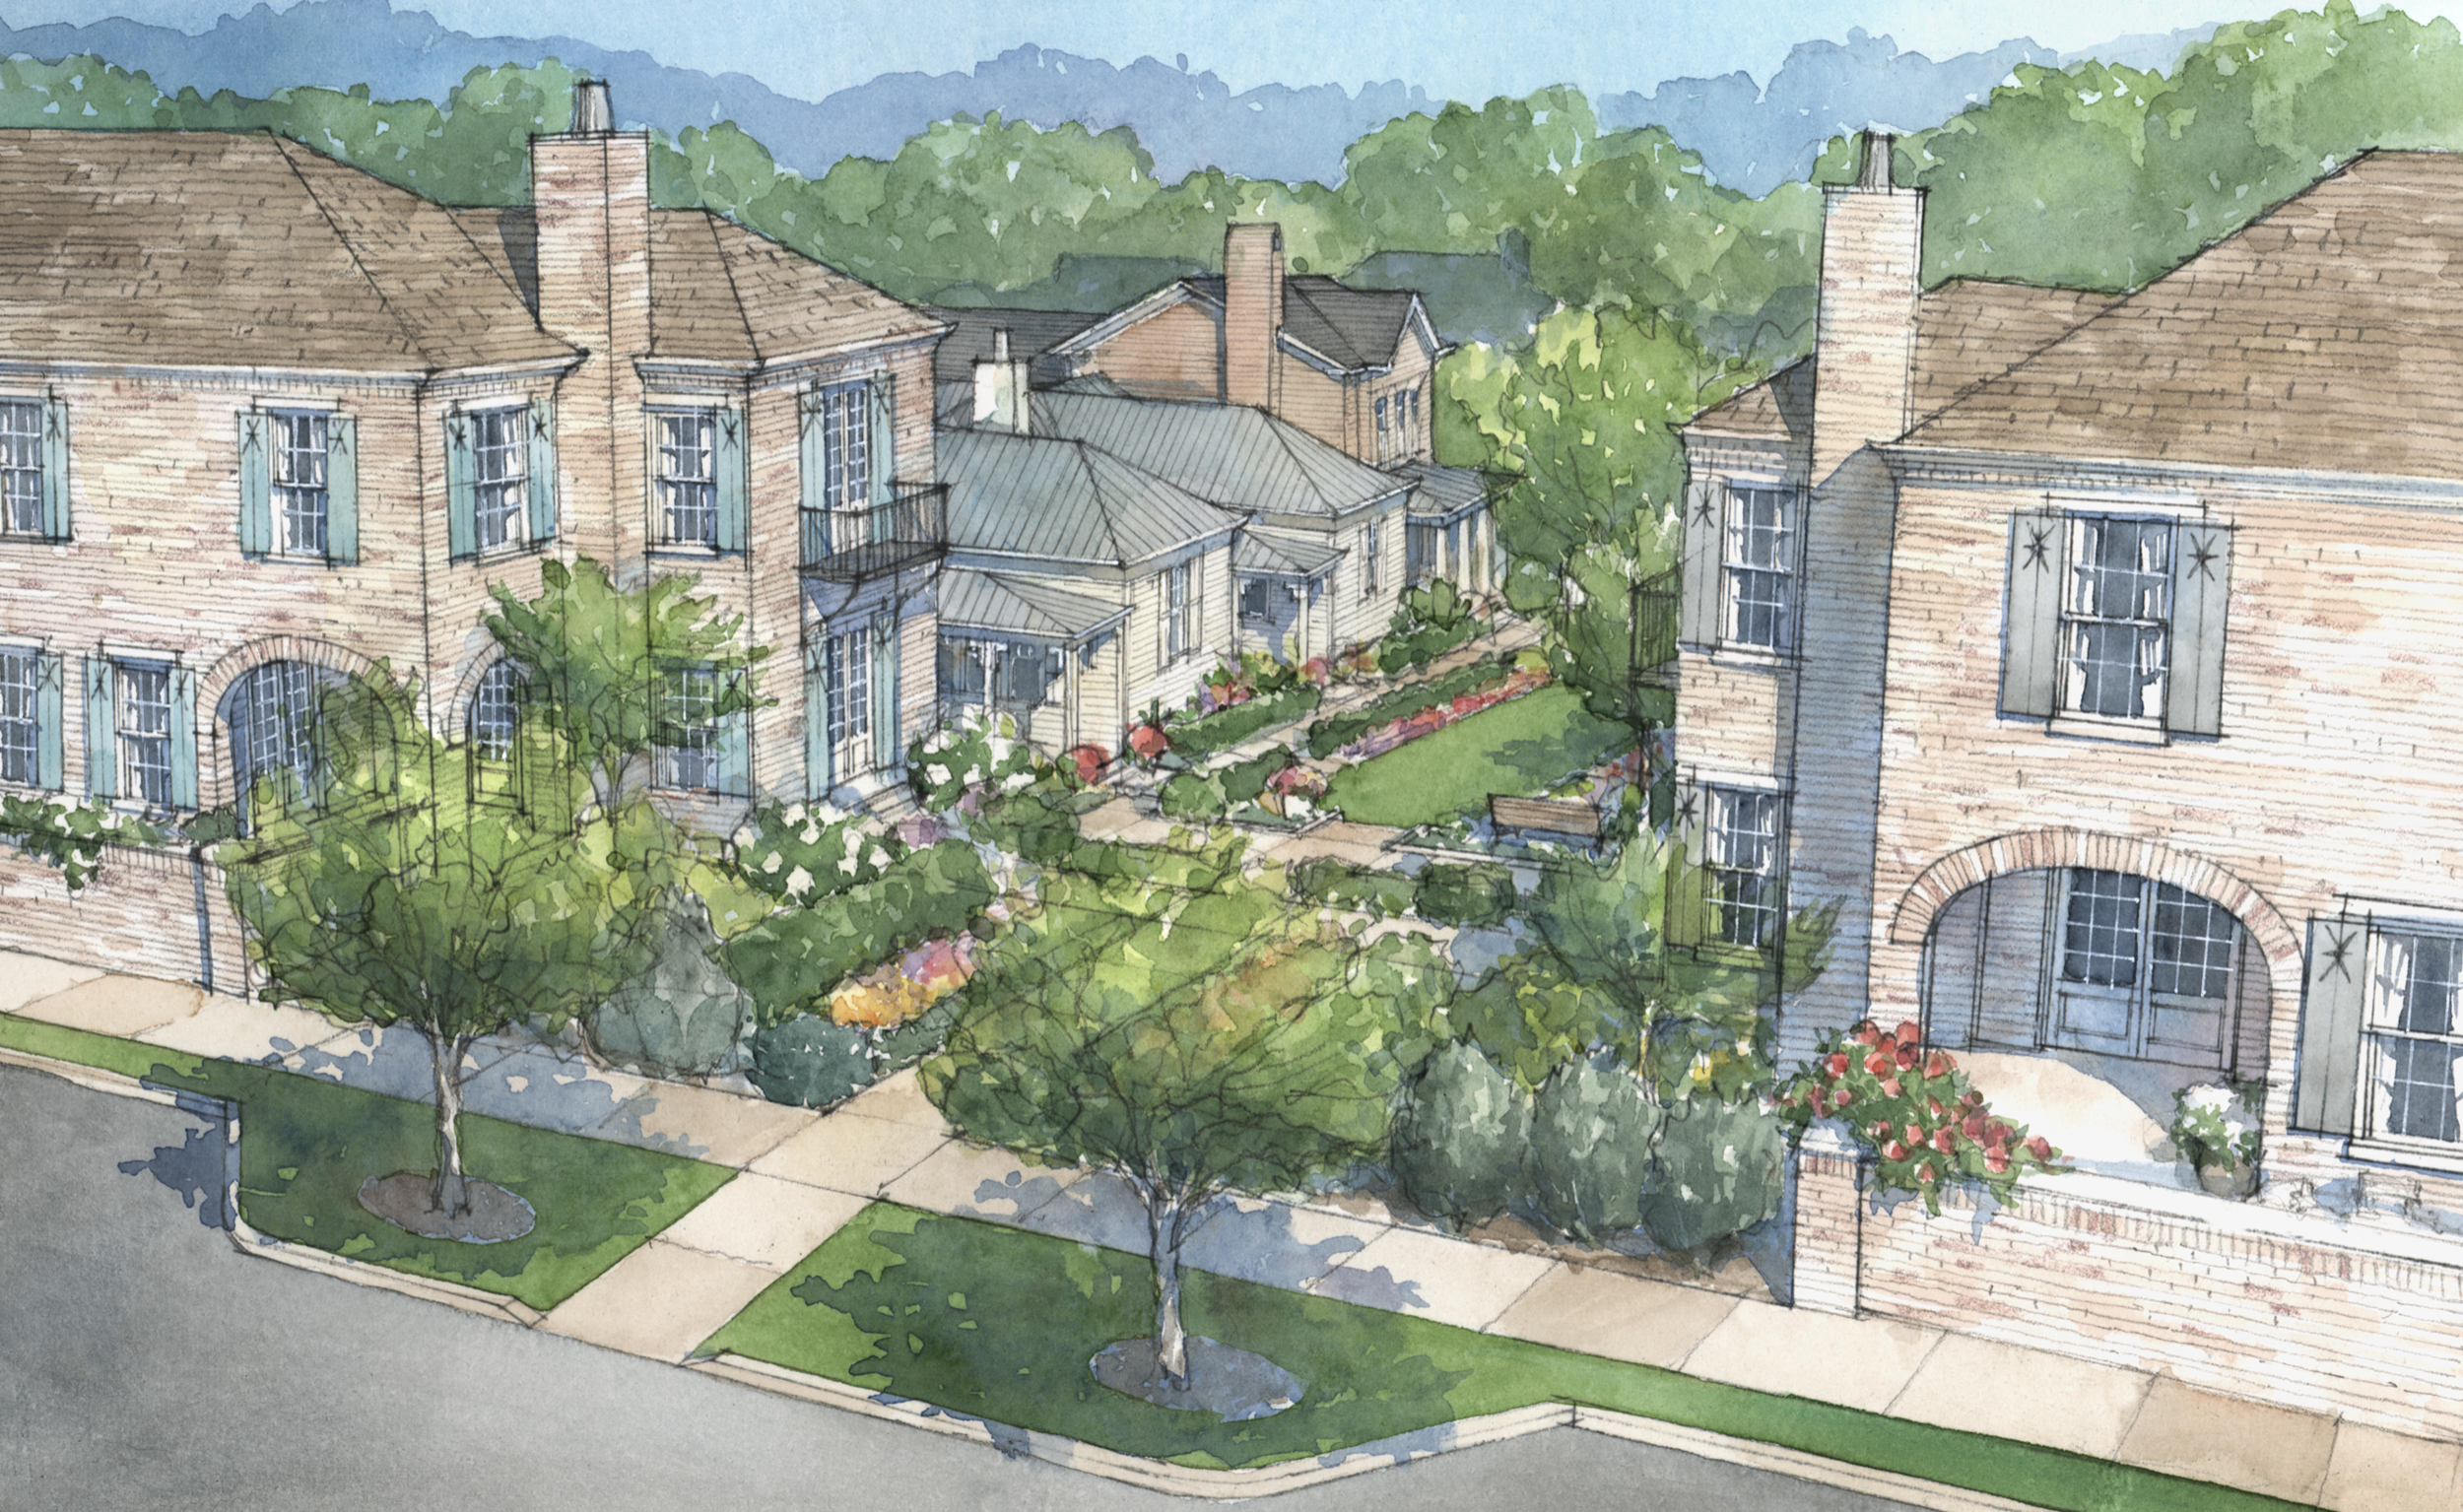 'New wave of urbanism' blooming in Greenville County with Hartness development